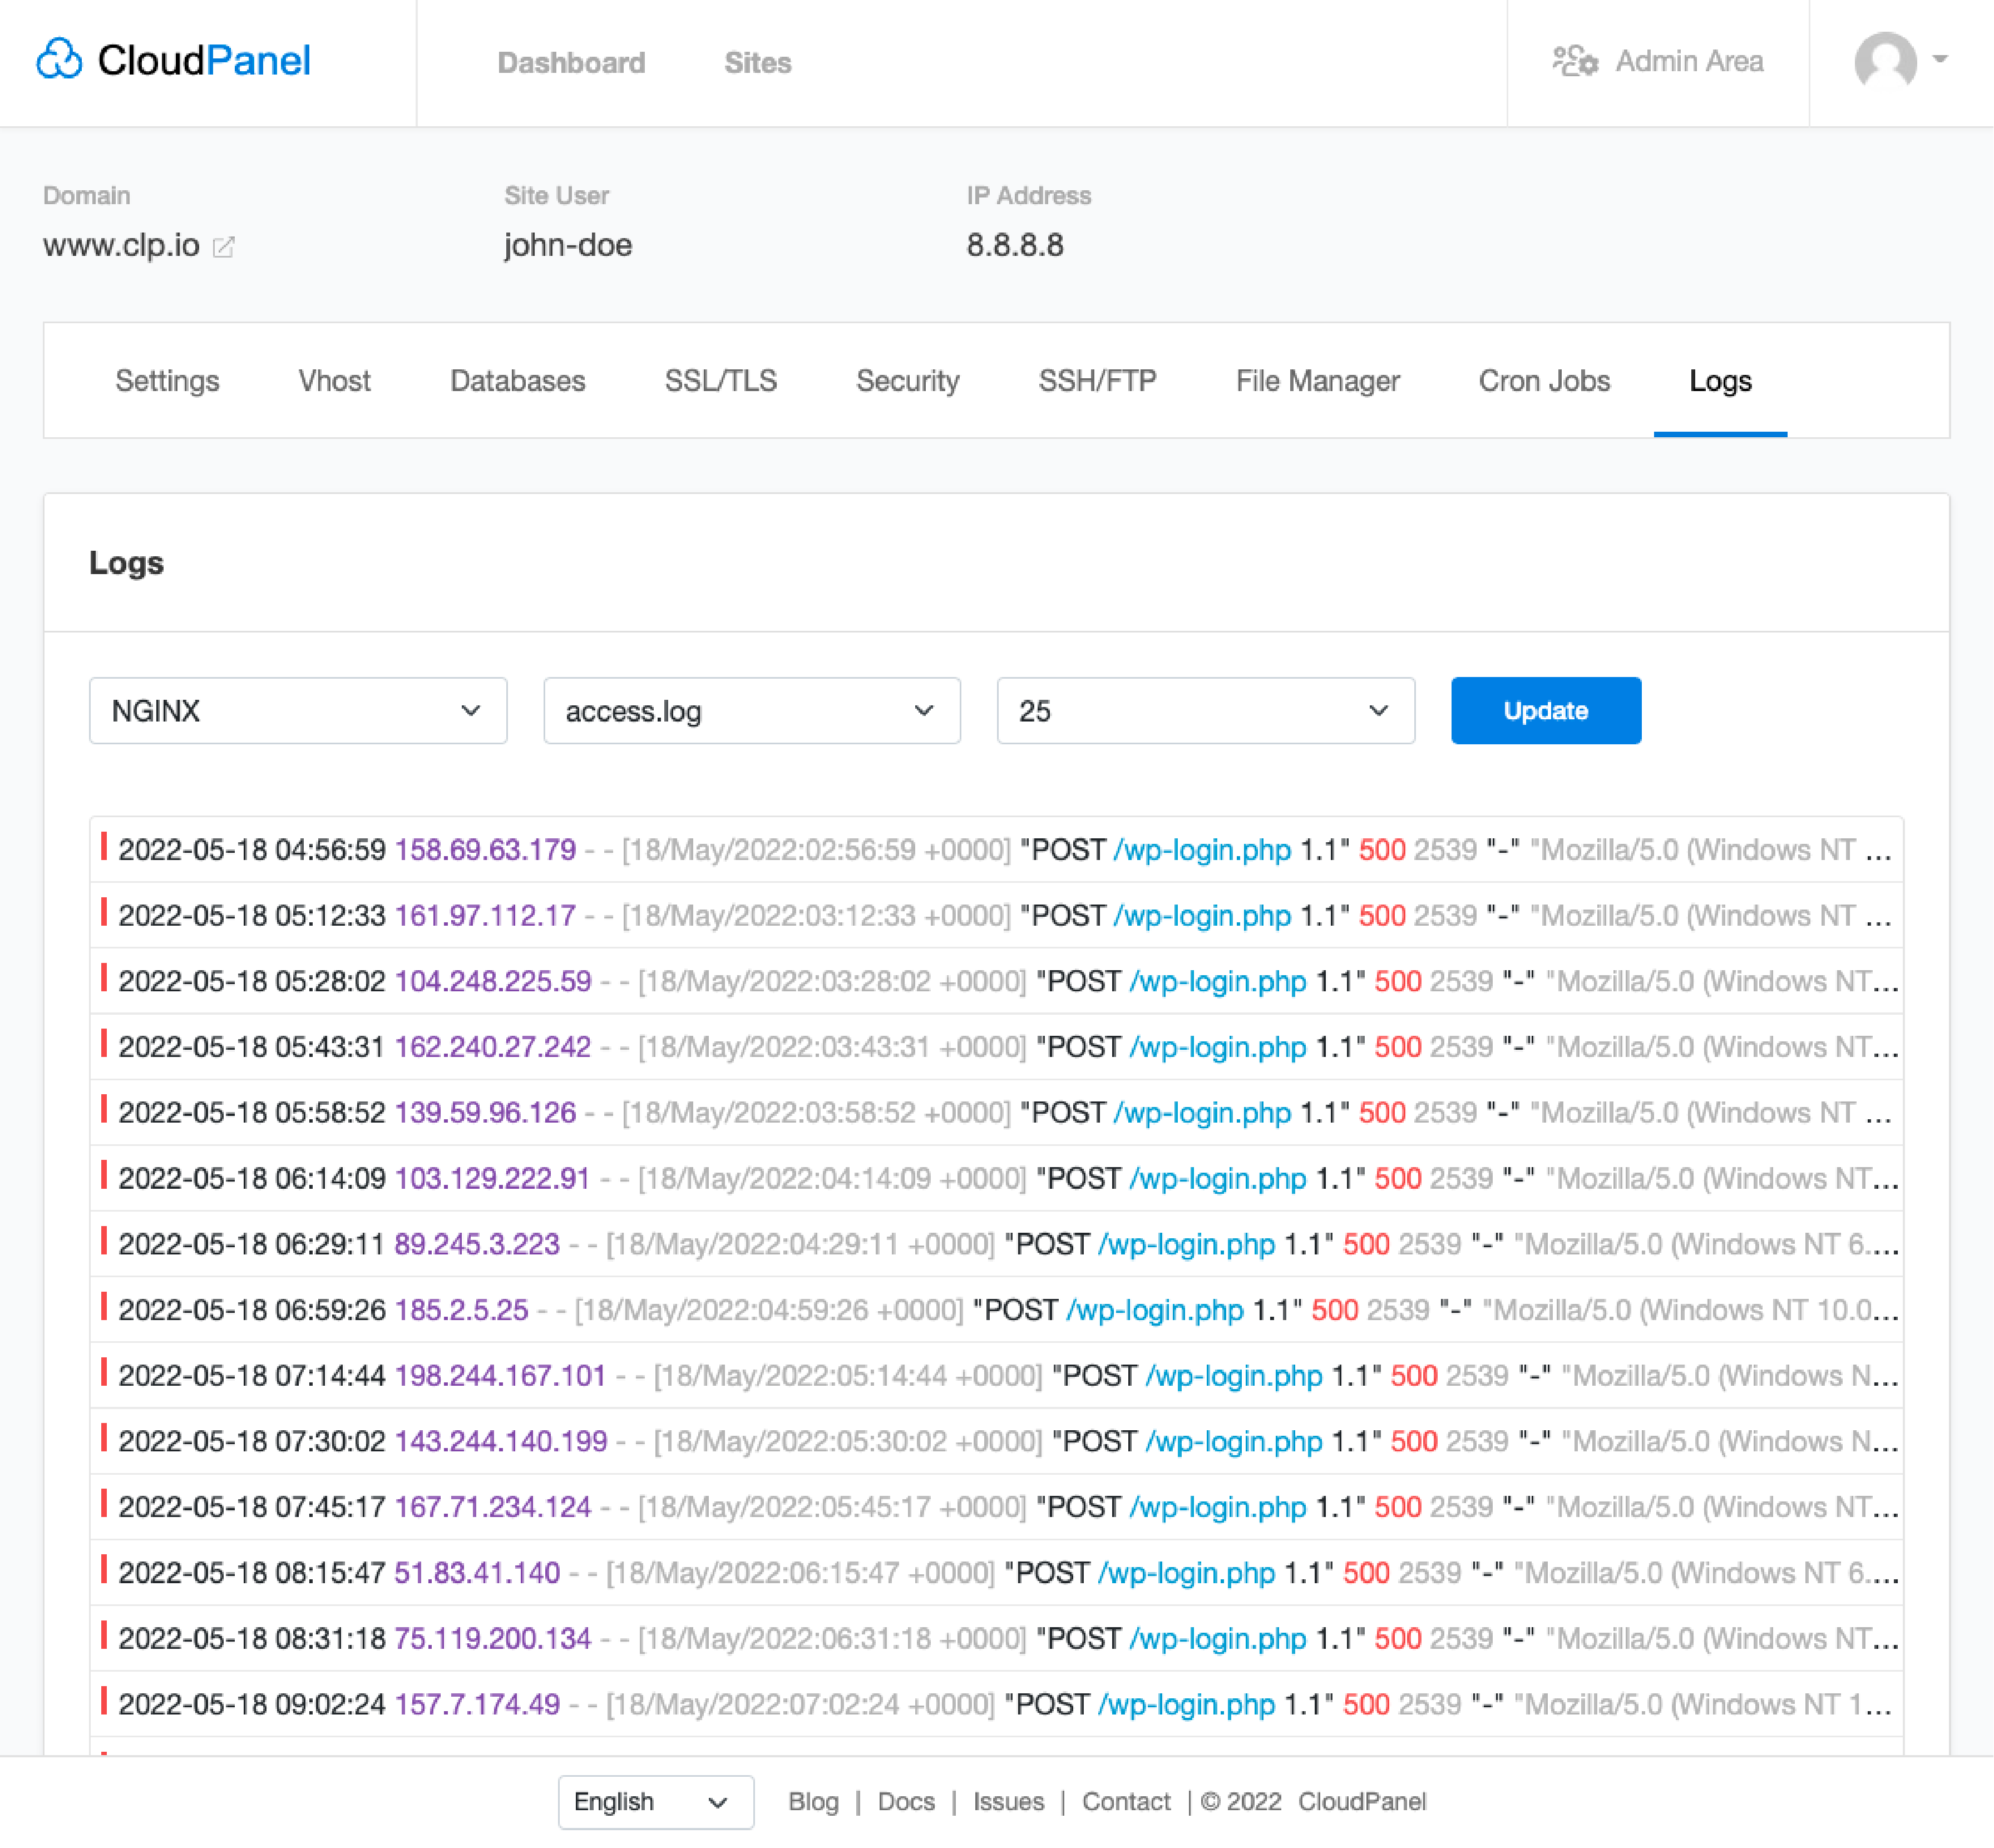 CloudPanel Log Viewer – A Powerful Tool for Log Management